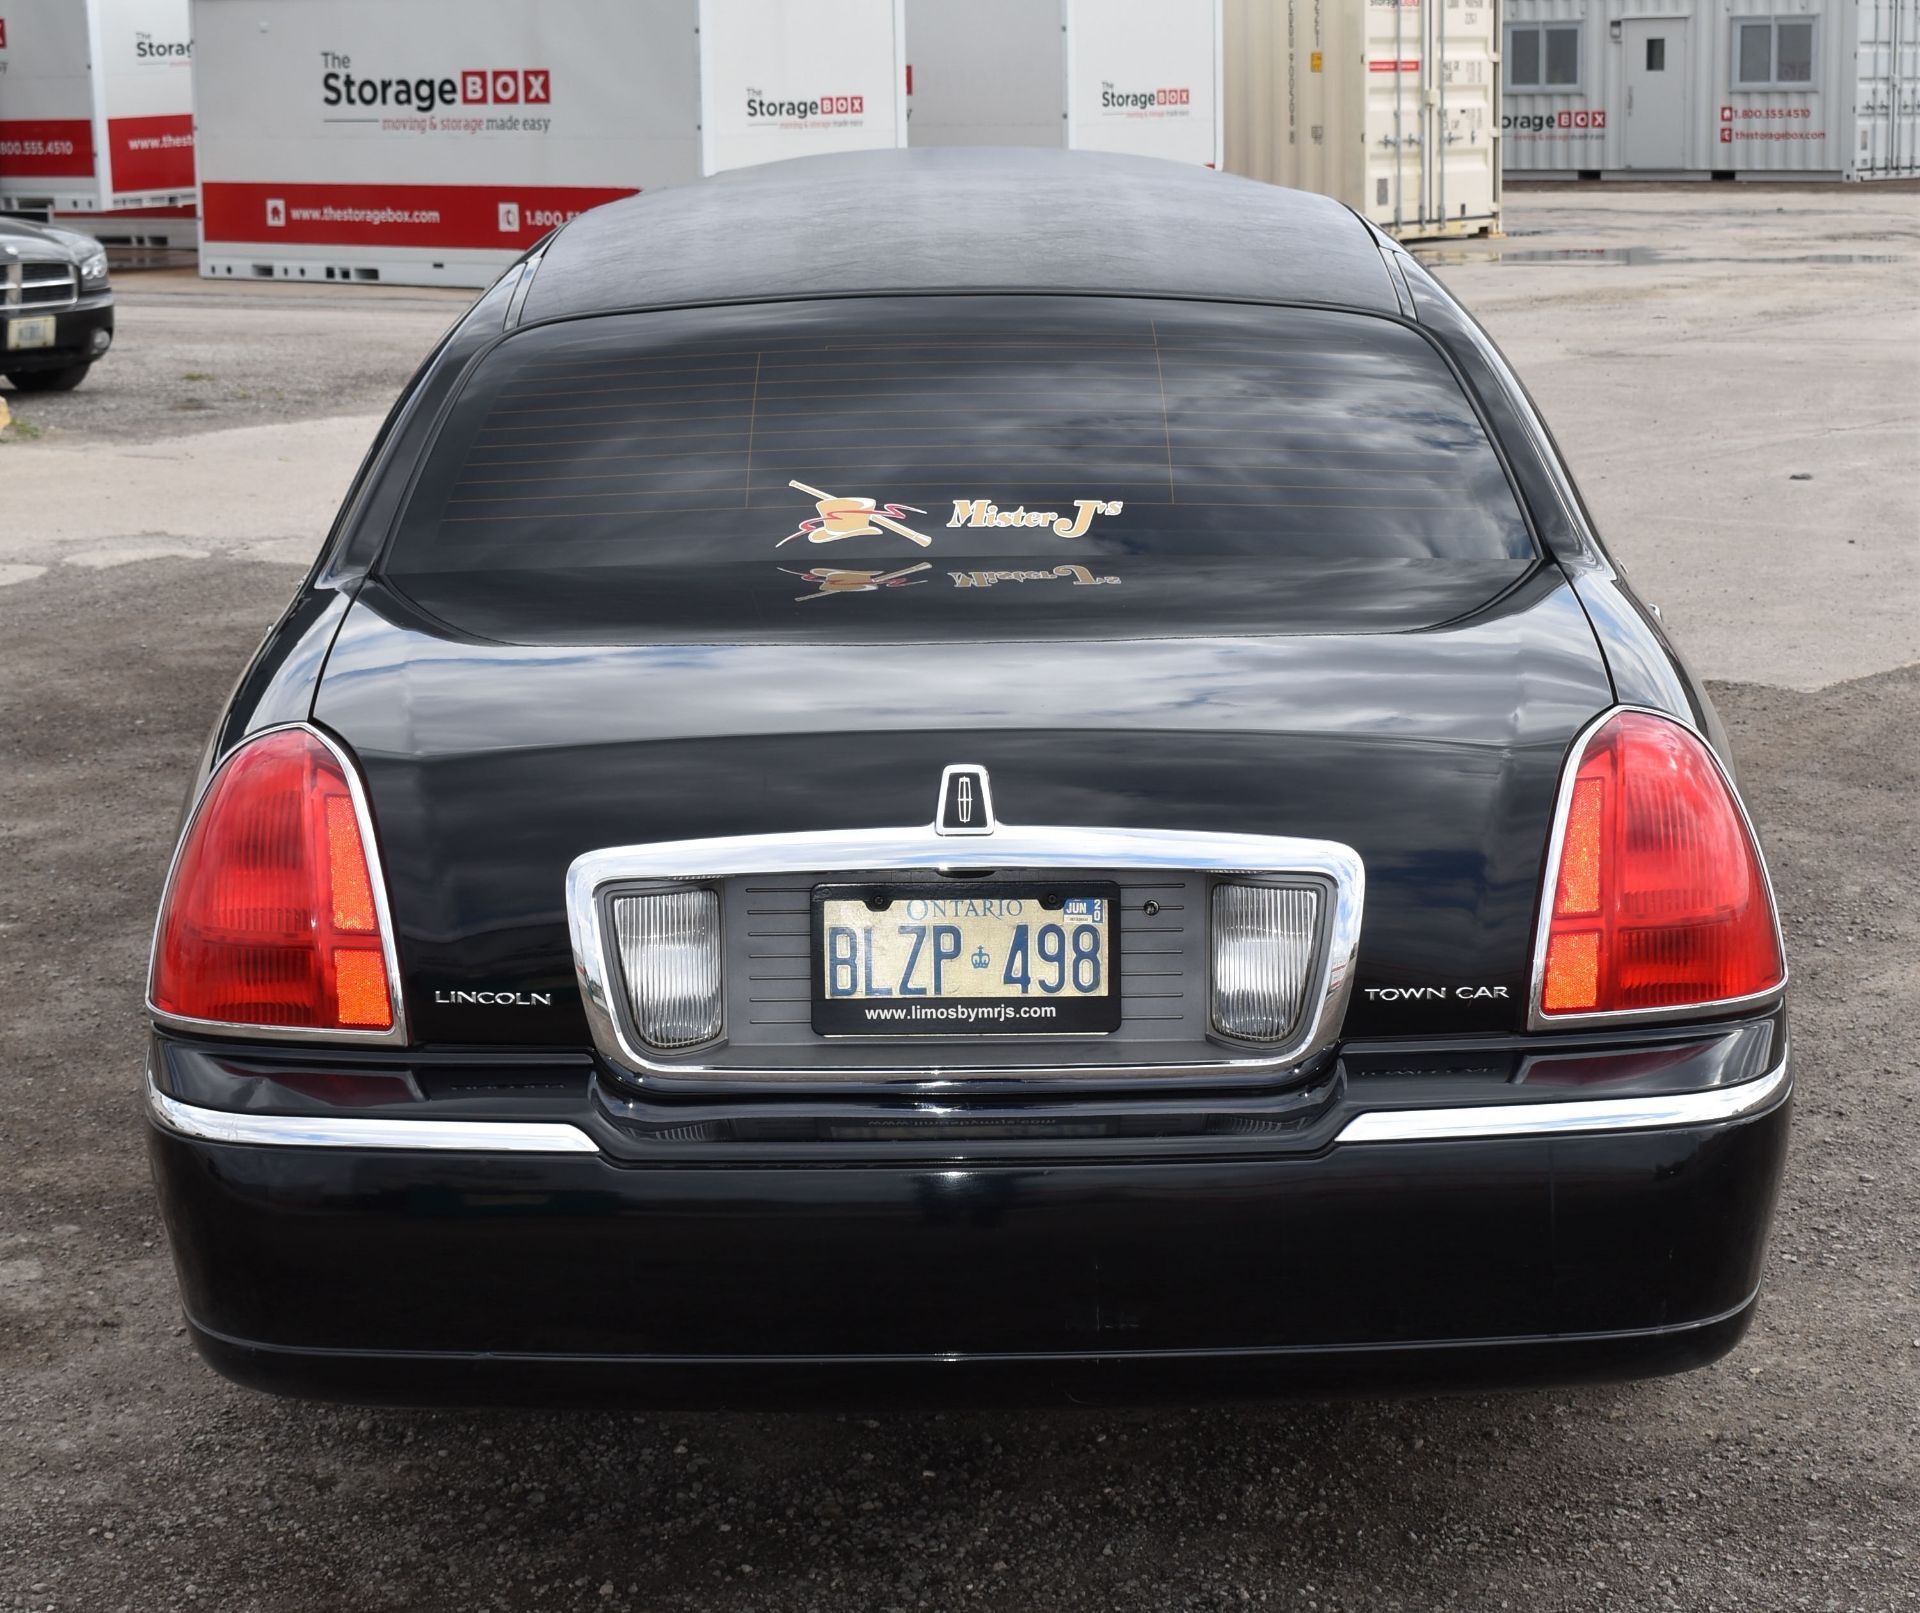 LINCOLN (2005) TOWN CAR 8 PASSENGER STRETCH LIMOUSINE WITH 8 CYLINDER 4.6L GAS ENGINE, 240,687KM ( - Image 5 of 20